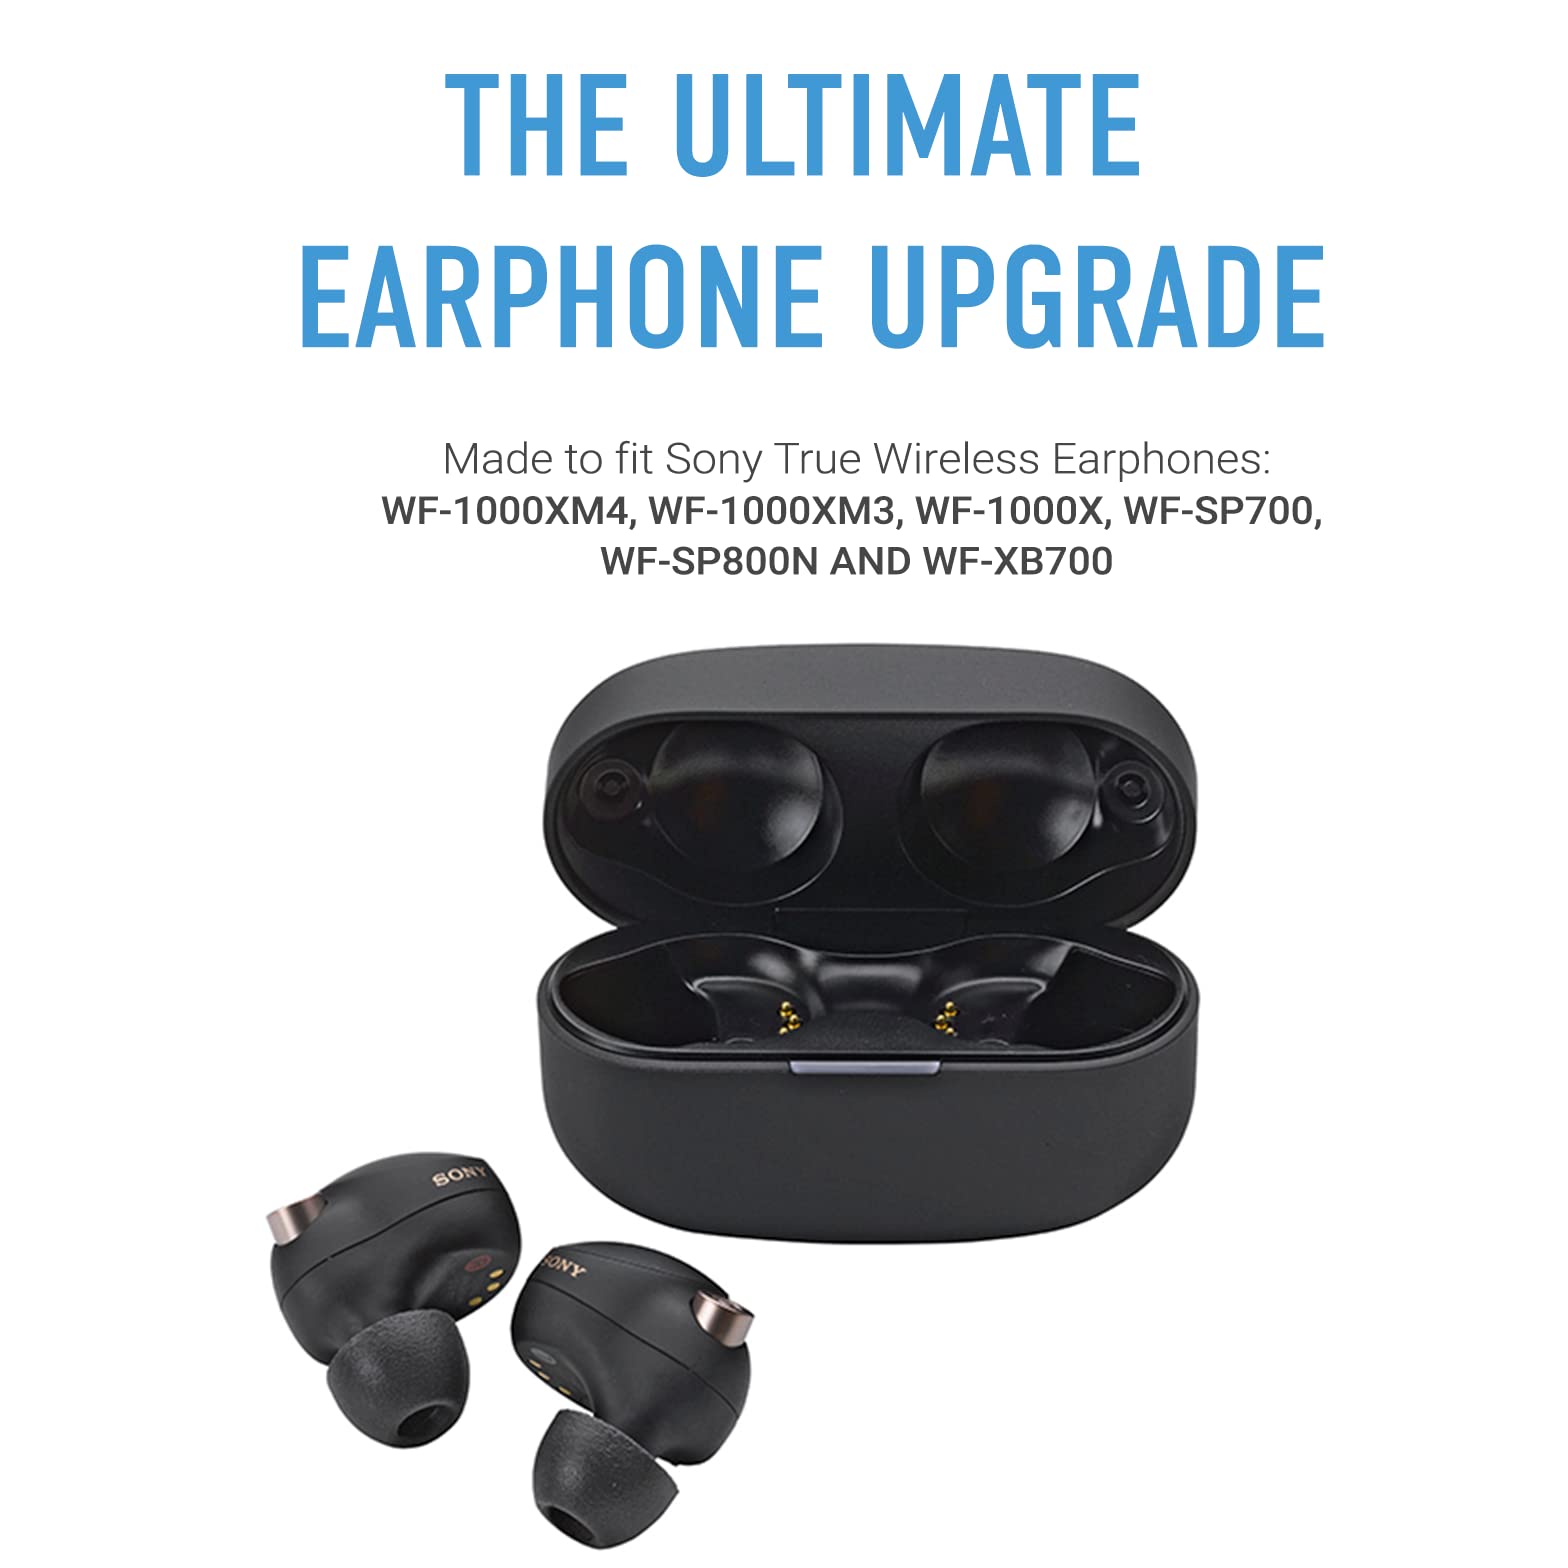 COMPLY Foam Ear Tips for Sony TrueWireless Earbuds - New Sony XM5, WF-1000XM5, WF-1000XM4, WF-1000XM3, WF-XB700, Ultimate Comfort Unshakeable Fit Medium, 3 Pairs,Black